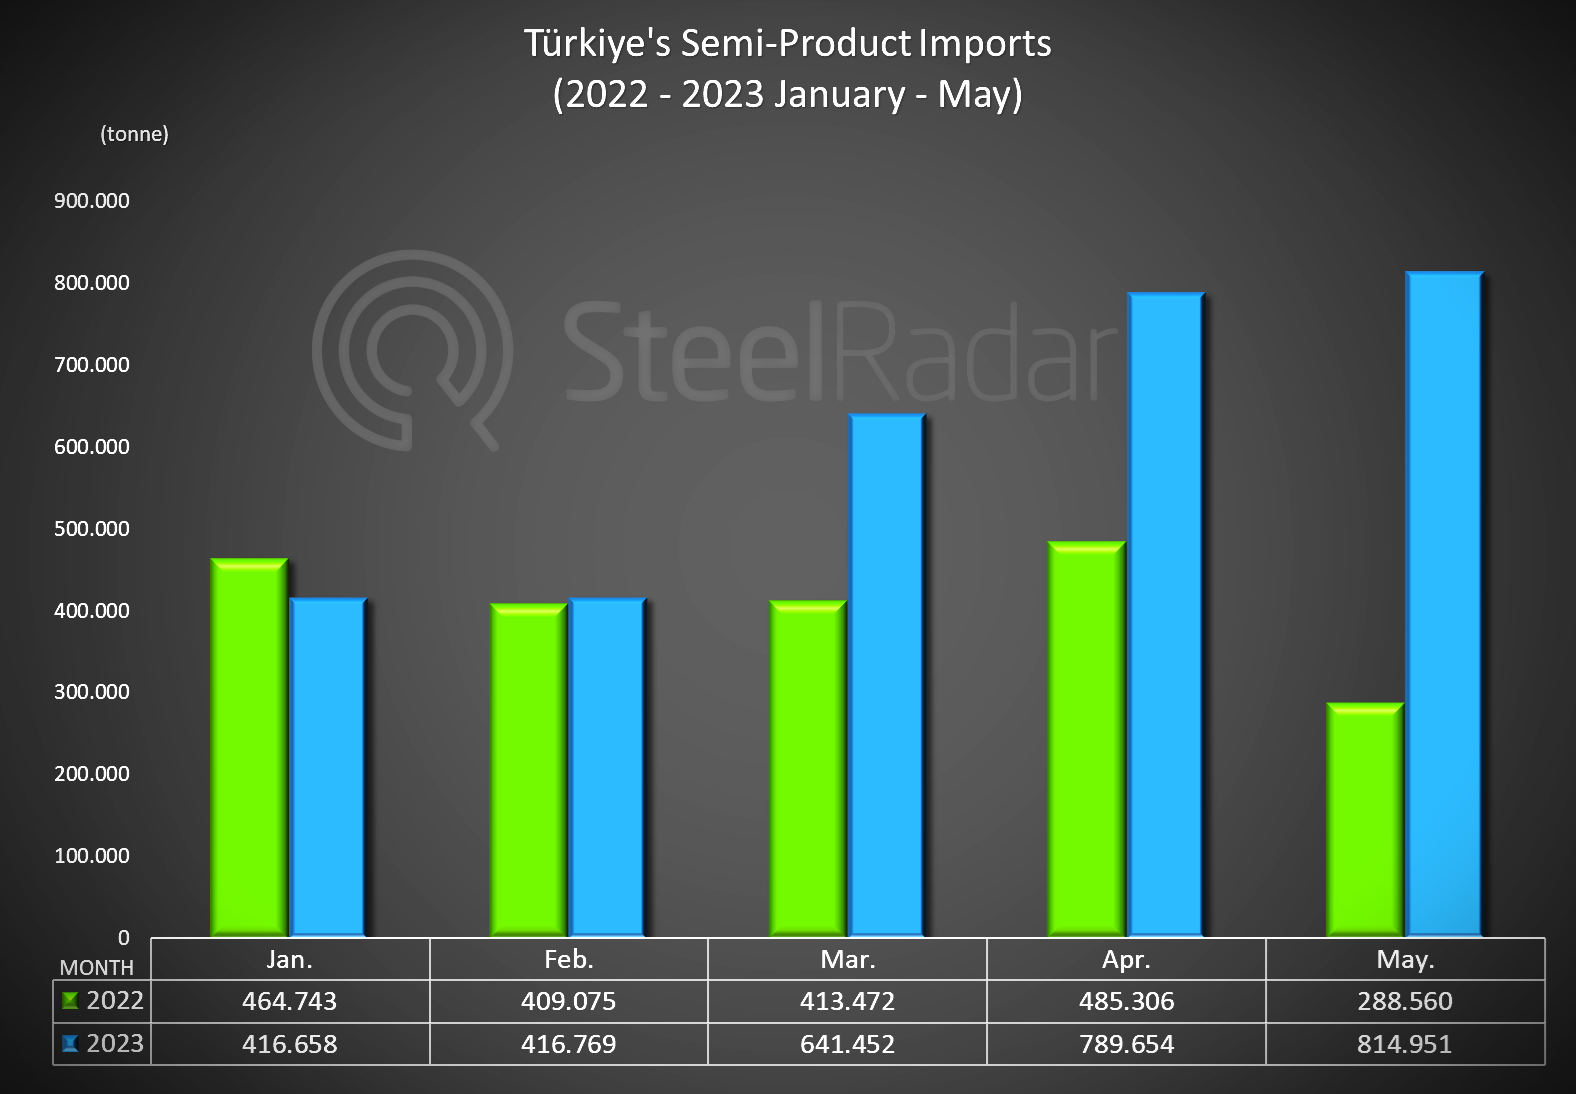 Turkey's semi-finished imports tripled in May